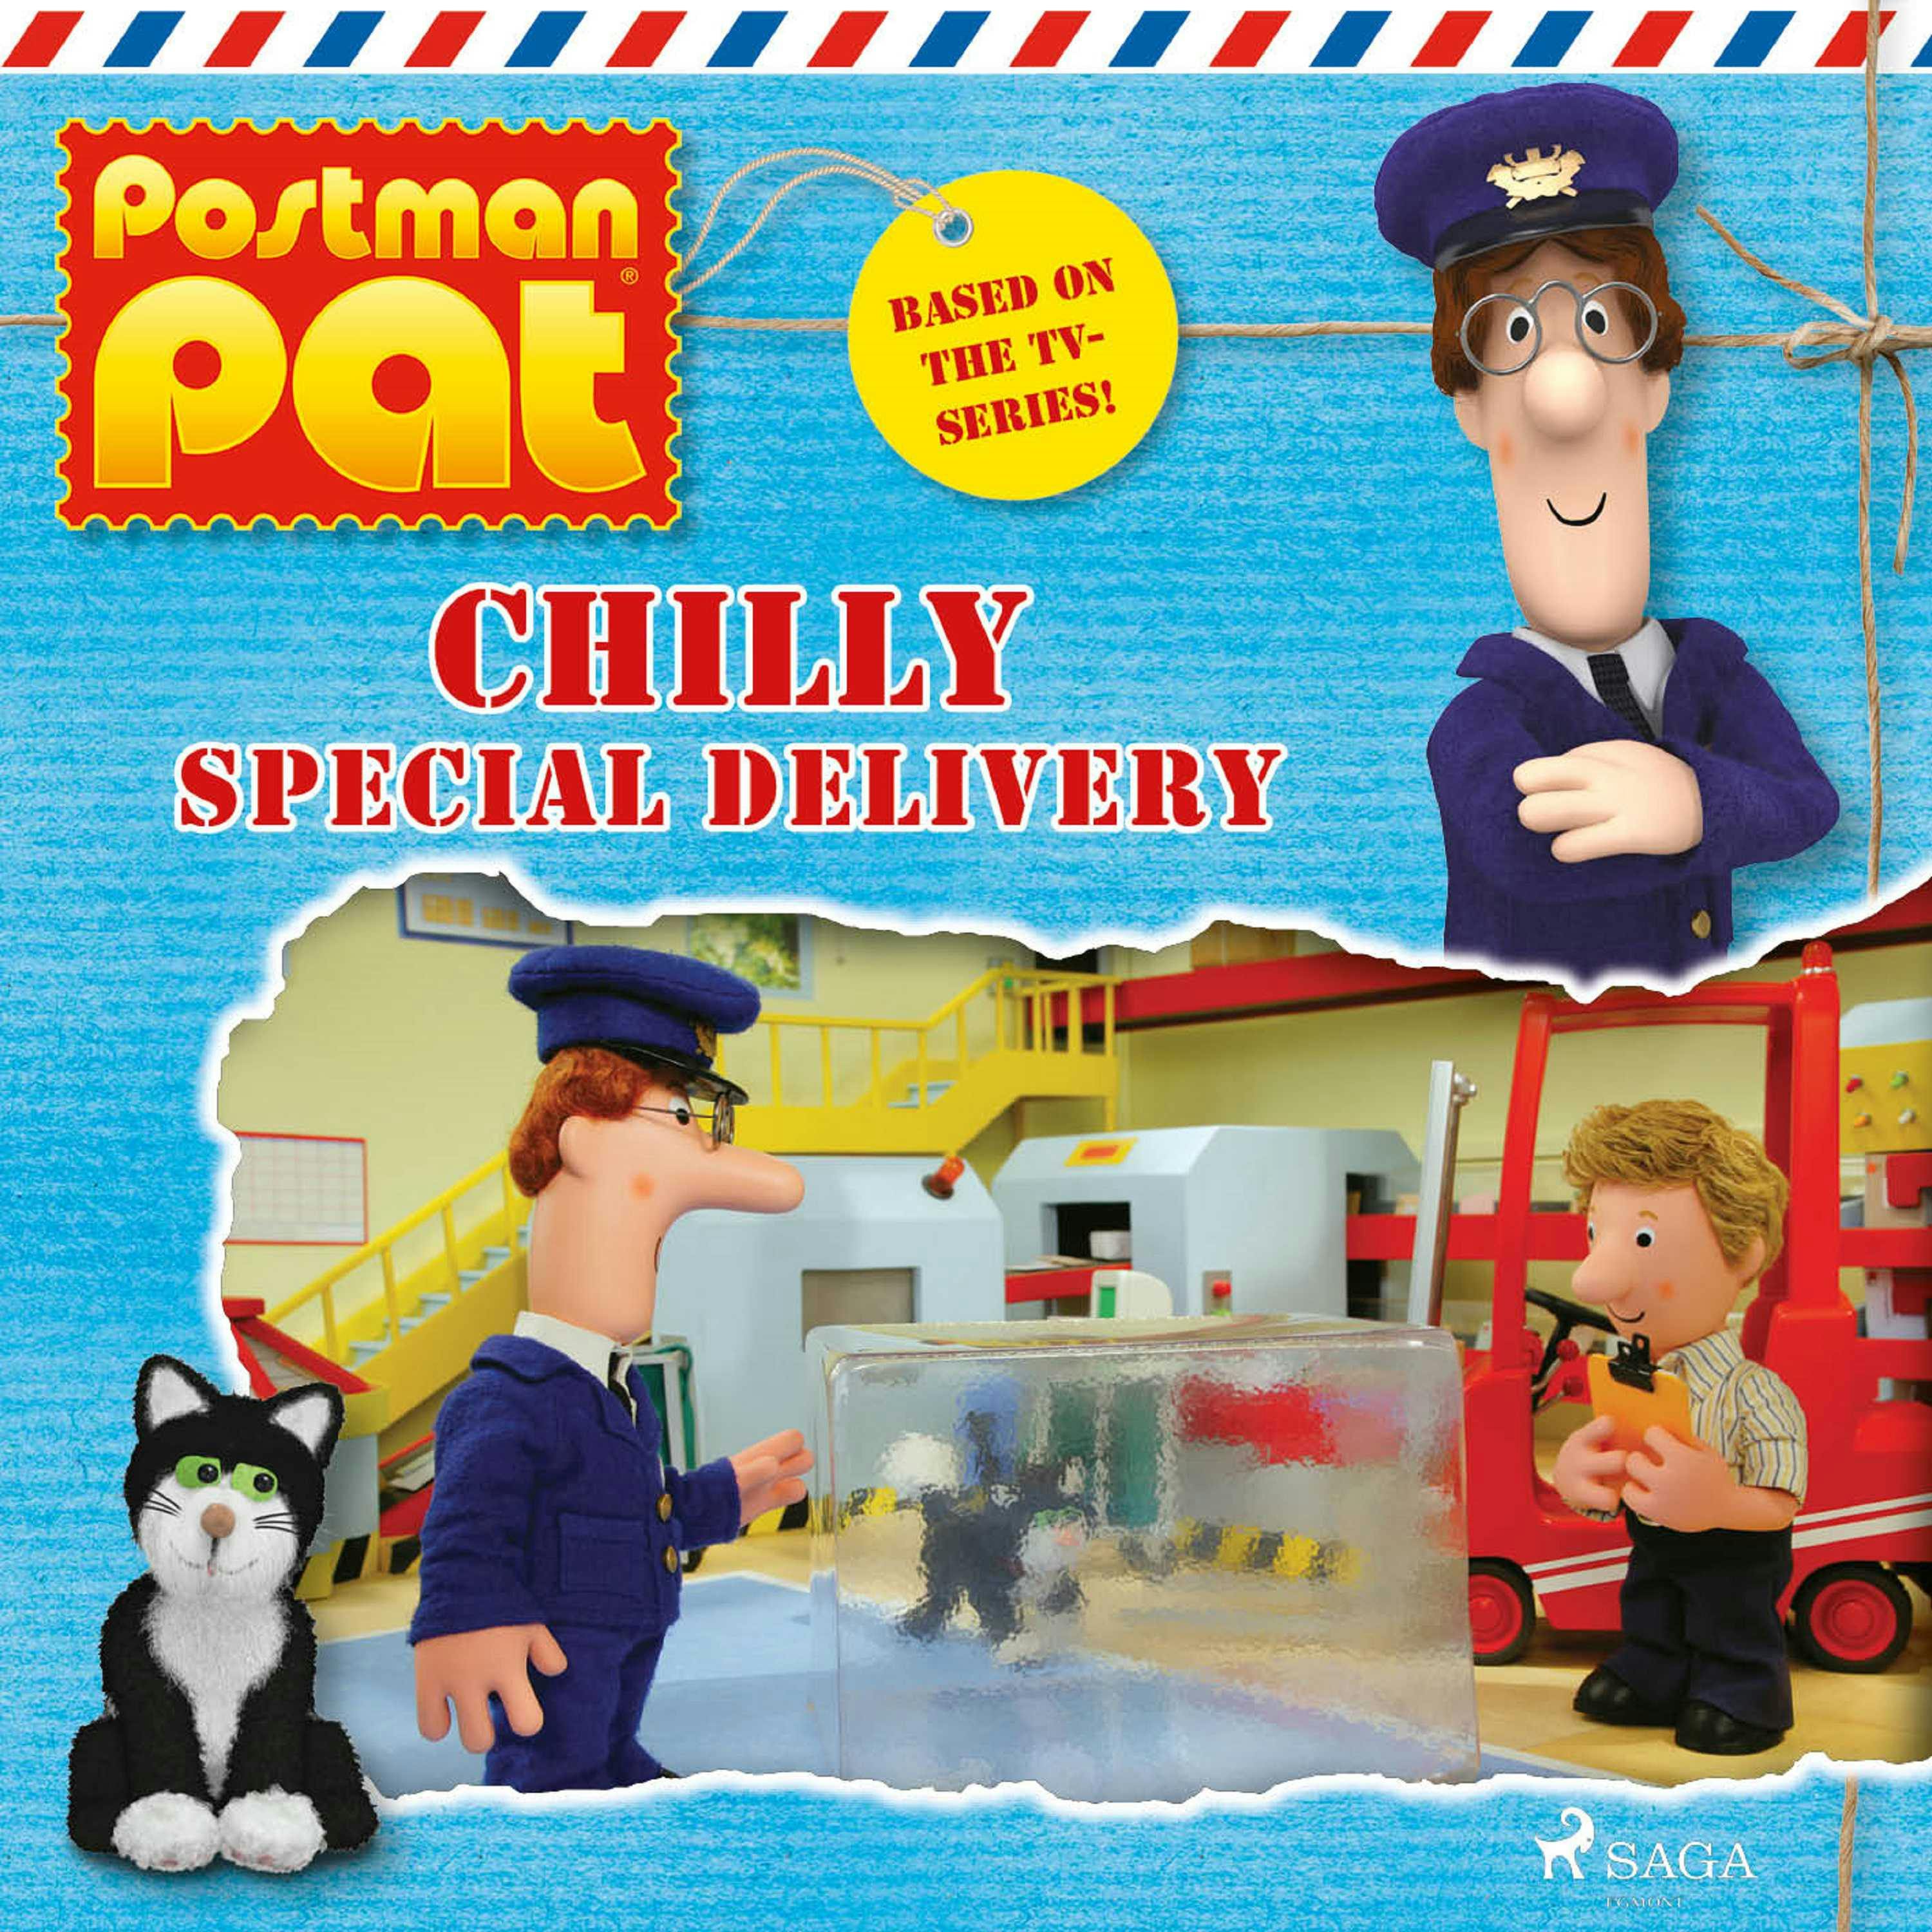 Postman Pat - Chilly Special Delivery - John A. Cunliffe